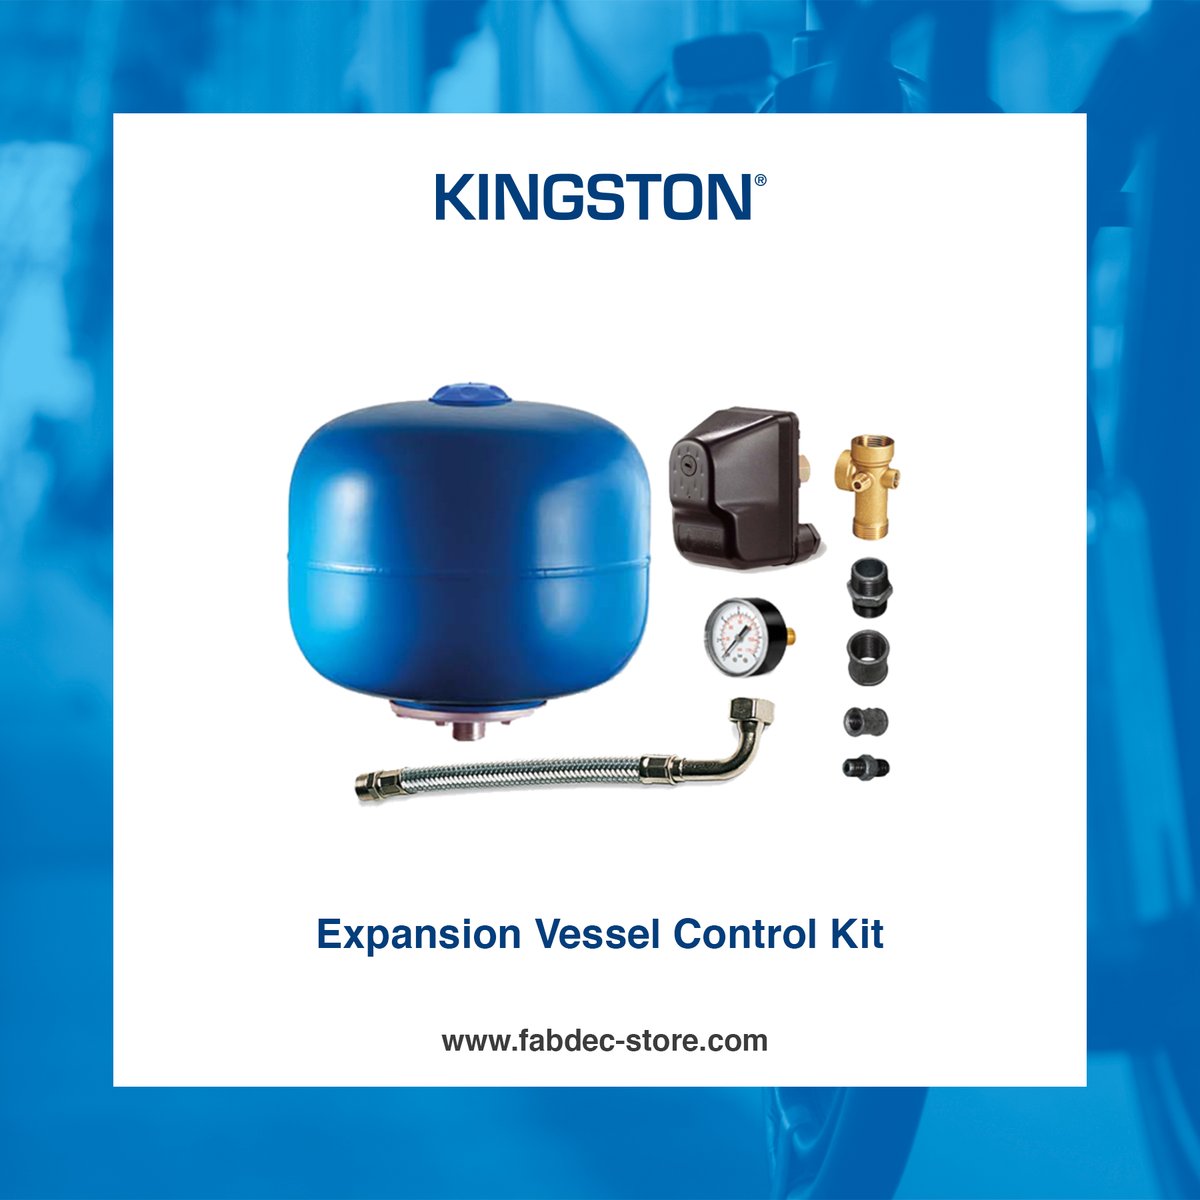 Expansion Vessel Control Kit available from fabdec-store.com

#expansionvesselkit #expansionvessel #controlkit #control #kingstonspares #koolspares #kingston #fabdec #teamdairy #dairy #milking #milkingequipment #milkcooling #dairyfarming #farmsupplies #shoponline #spares